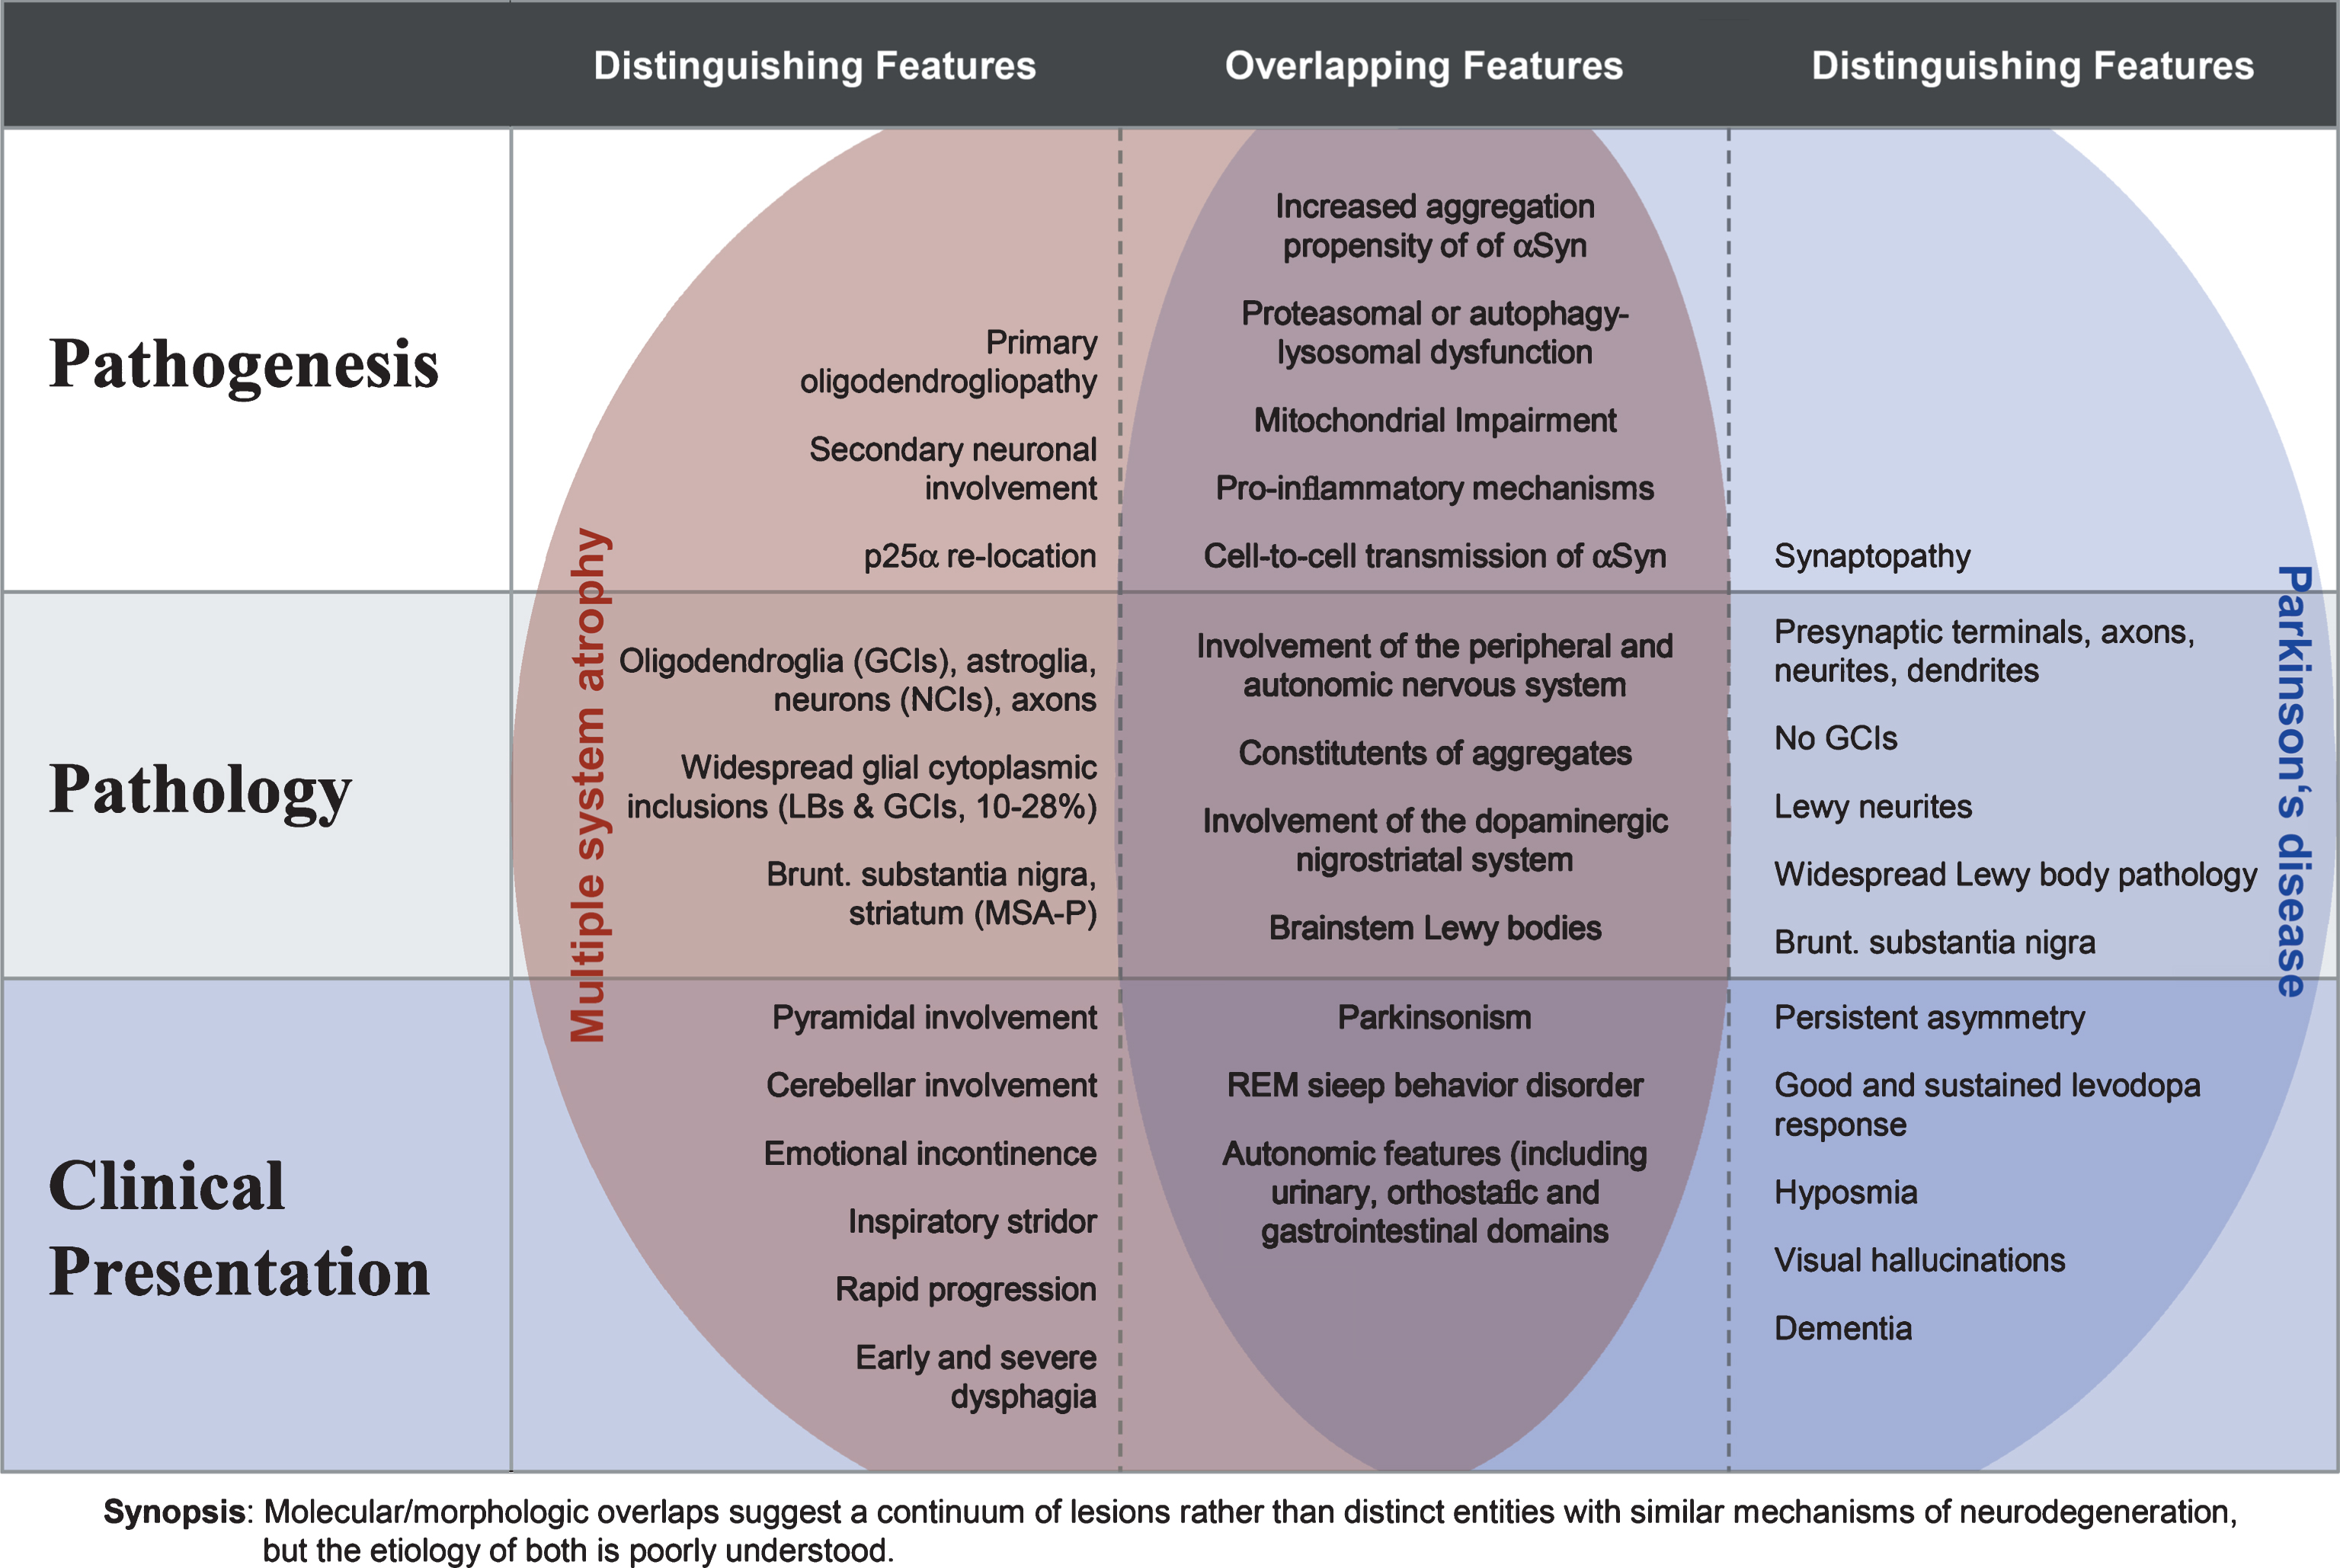 Overlapping and distinguishing features of MSA and PD at the pathogenic, neuropathologic and clinical level (modified from [22]).